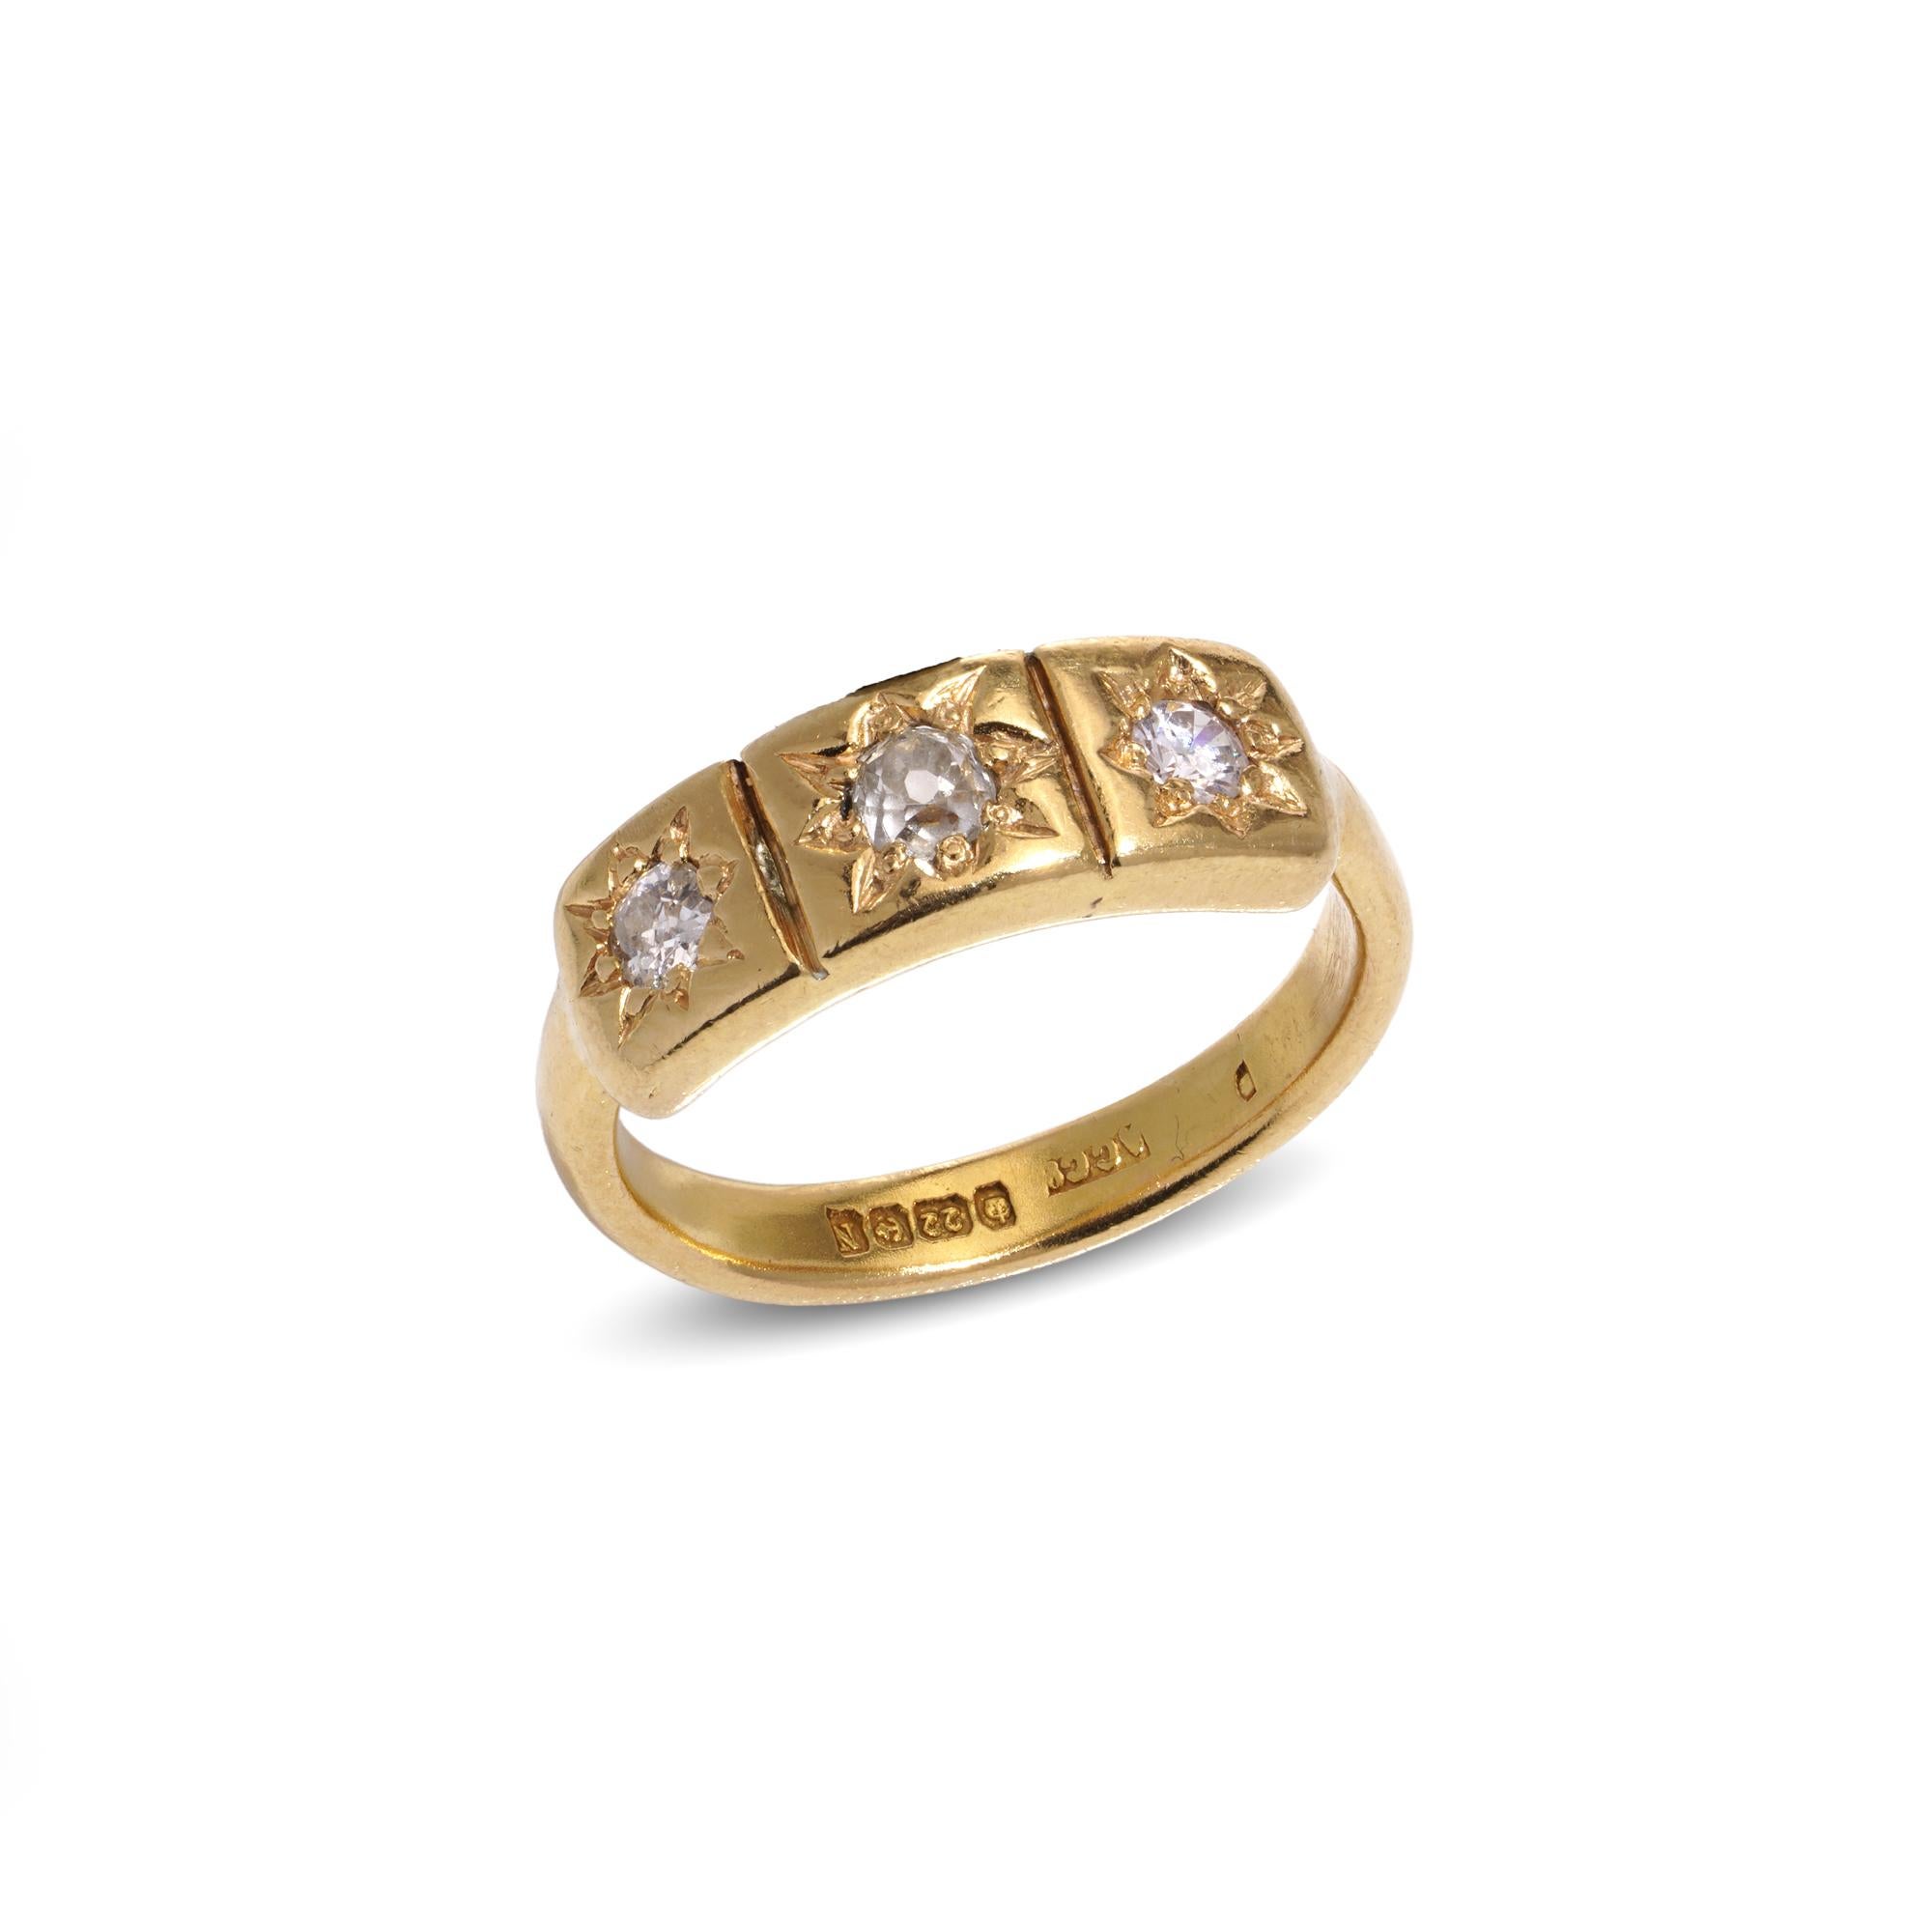 This is a vintage three-stone diamond ring crafted from 22-karat yellow gold. The diamonds are elegantly set in a star-setting arrangement. It was made in Birmingham, England, in late 1937, and it bears a full hallmark, including the maker's mark